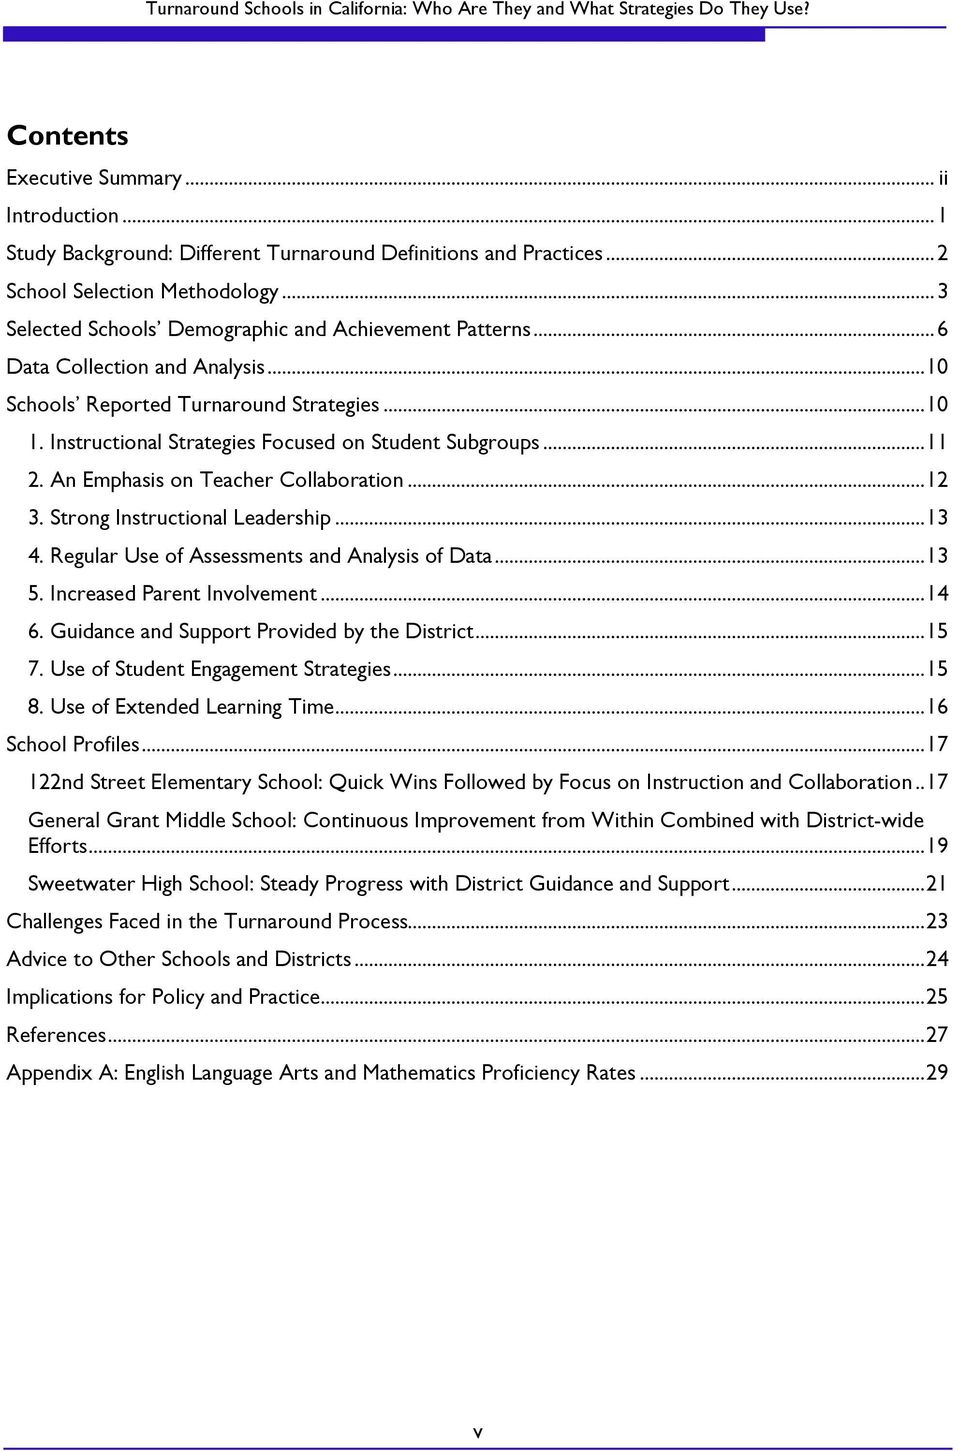 Instructional Strategies Focused on Student Subgroups... 11 2. An Emphasis on Teacher Collaboration... 12 3. Strong Instructional Leadership... 13 4. Regular Use of Assessments and Analysis of Data.